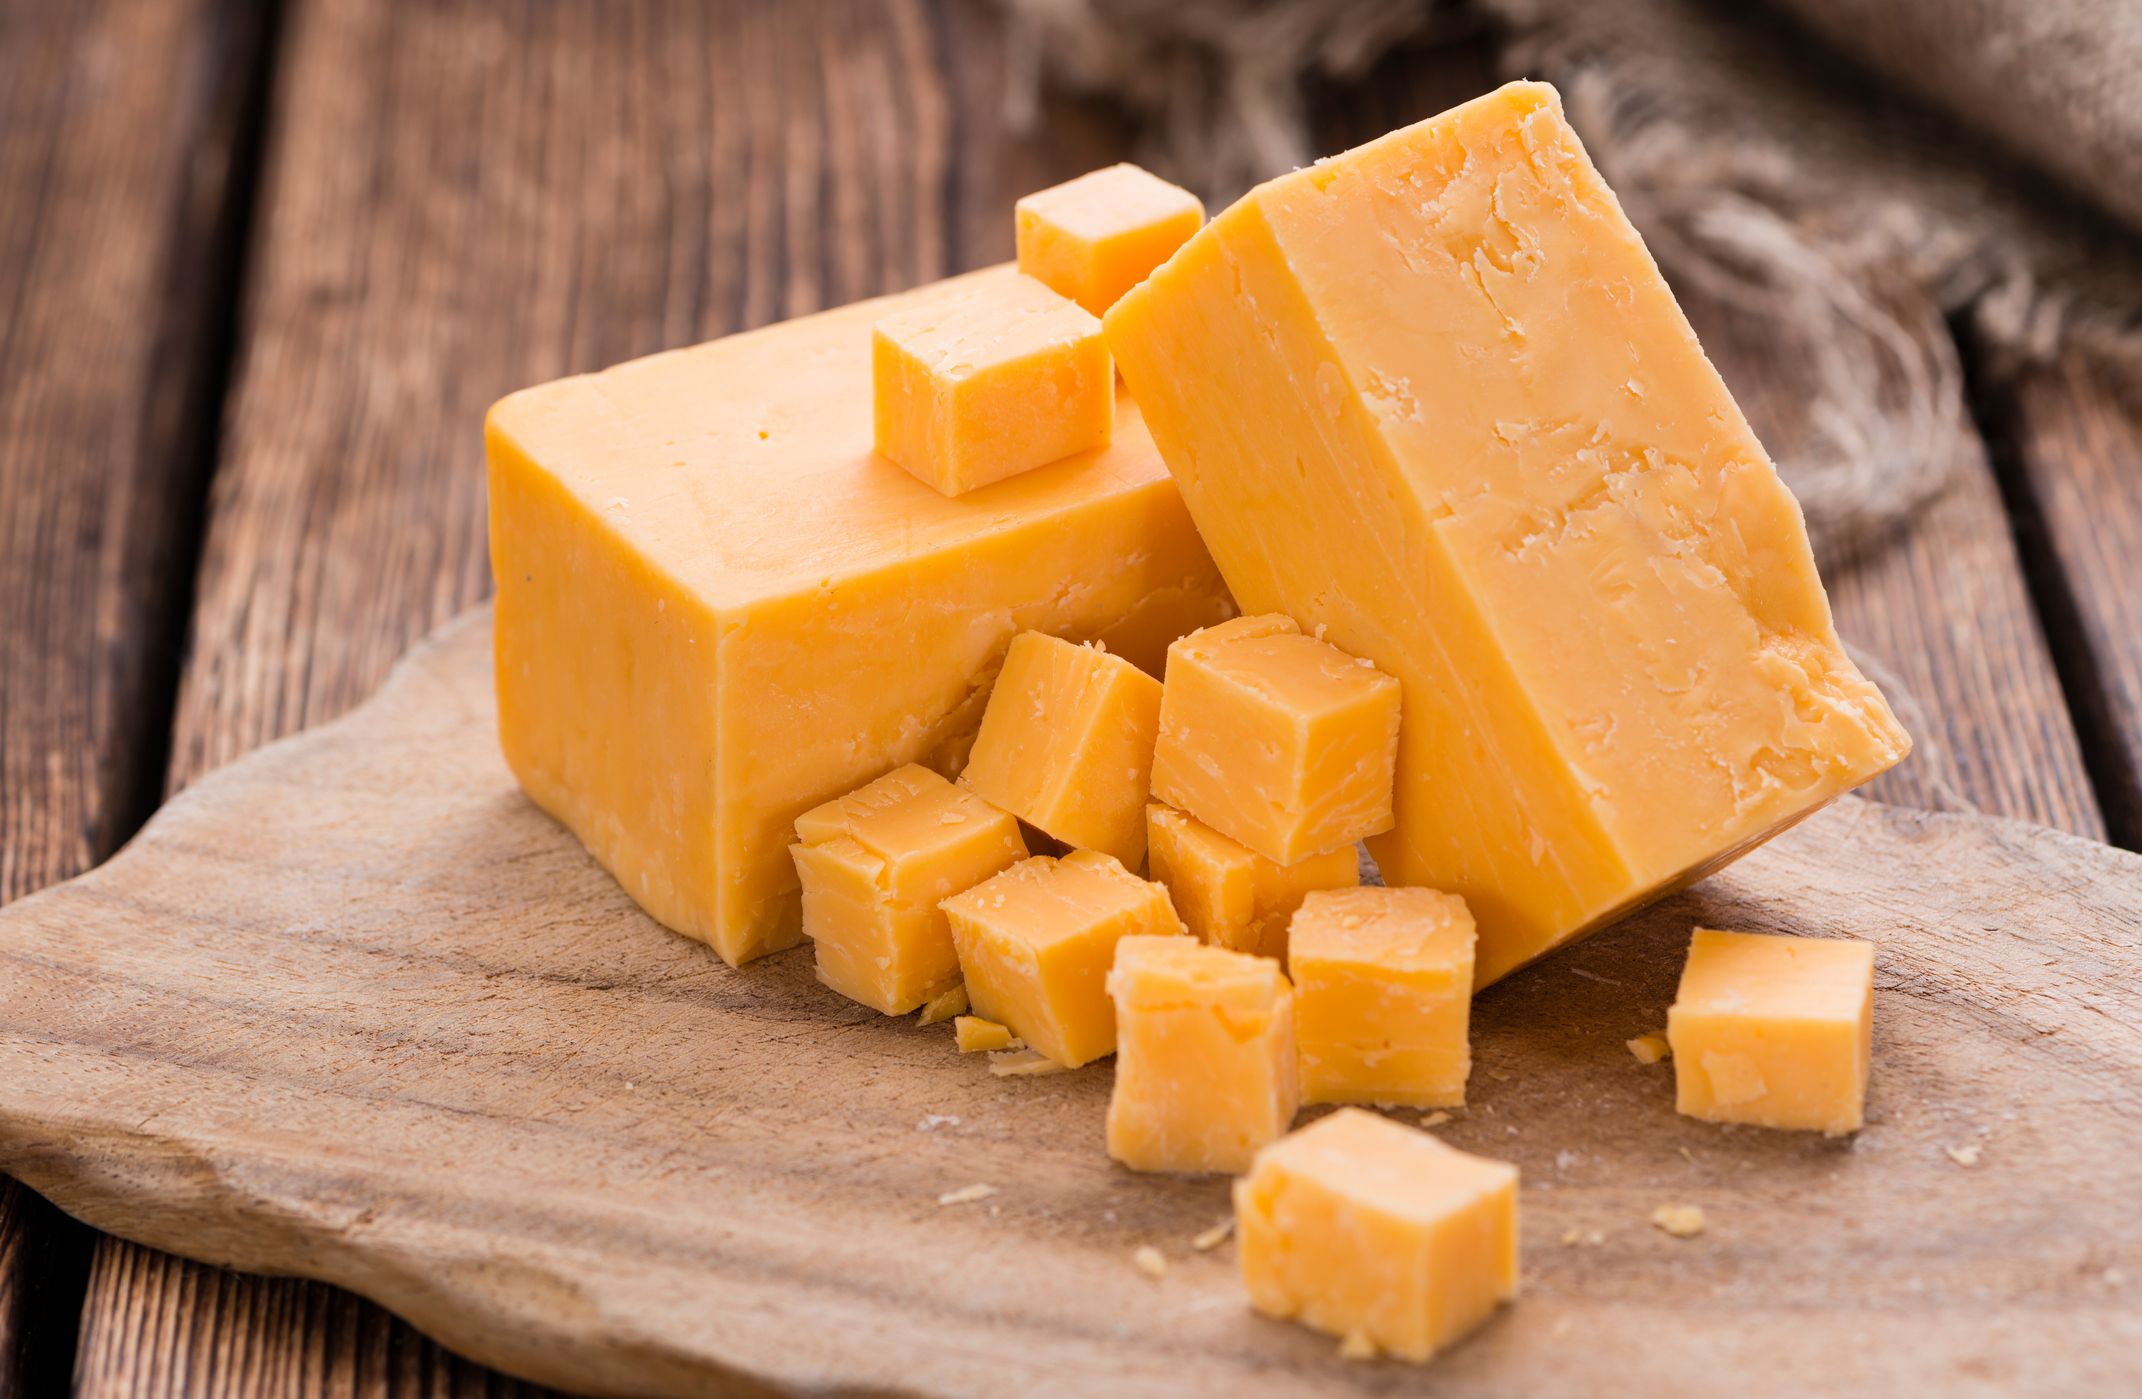 How to Store Cheese to Keep It Fresher Longer